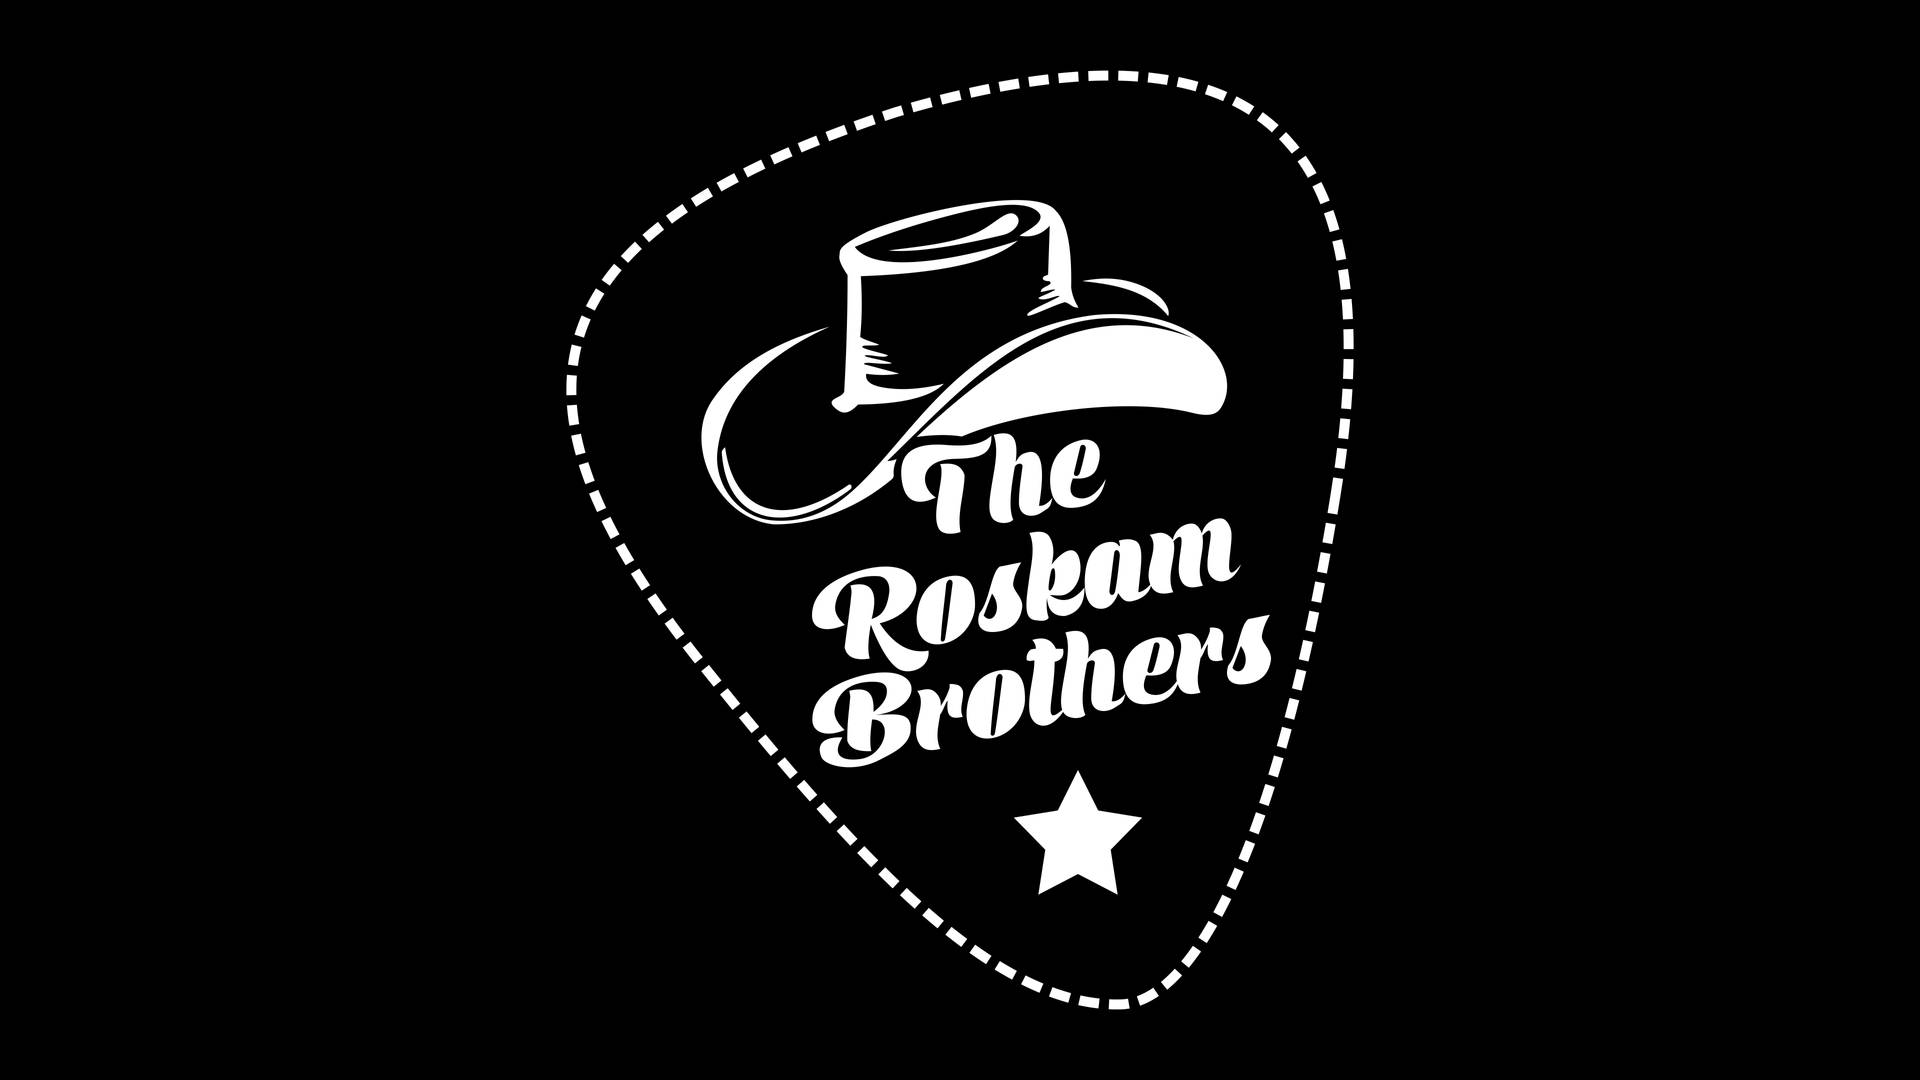 Far Cry 5 The Roskam Brothers Logo Wallpaper